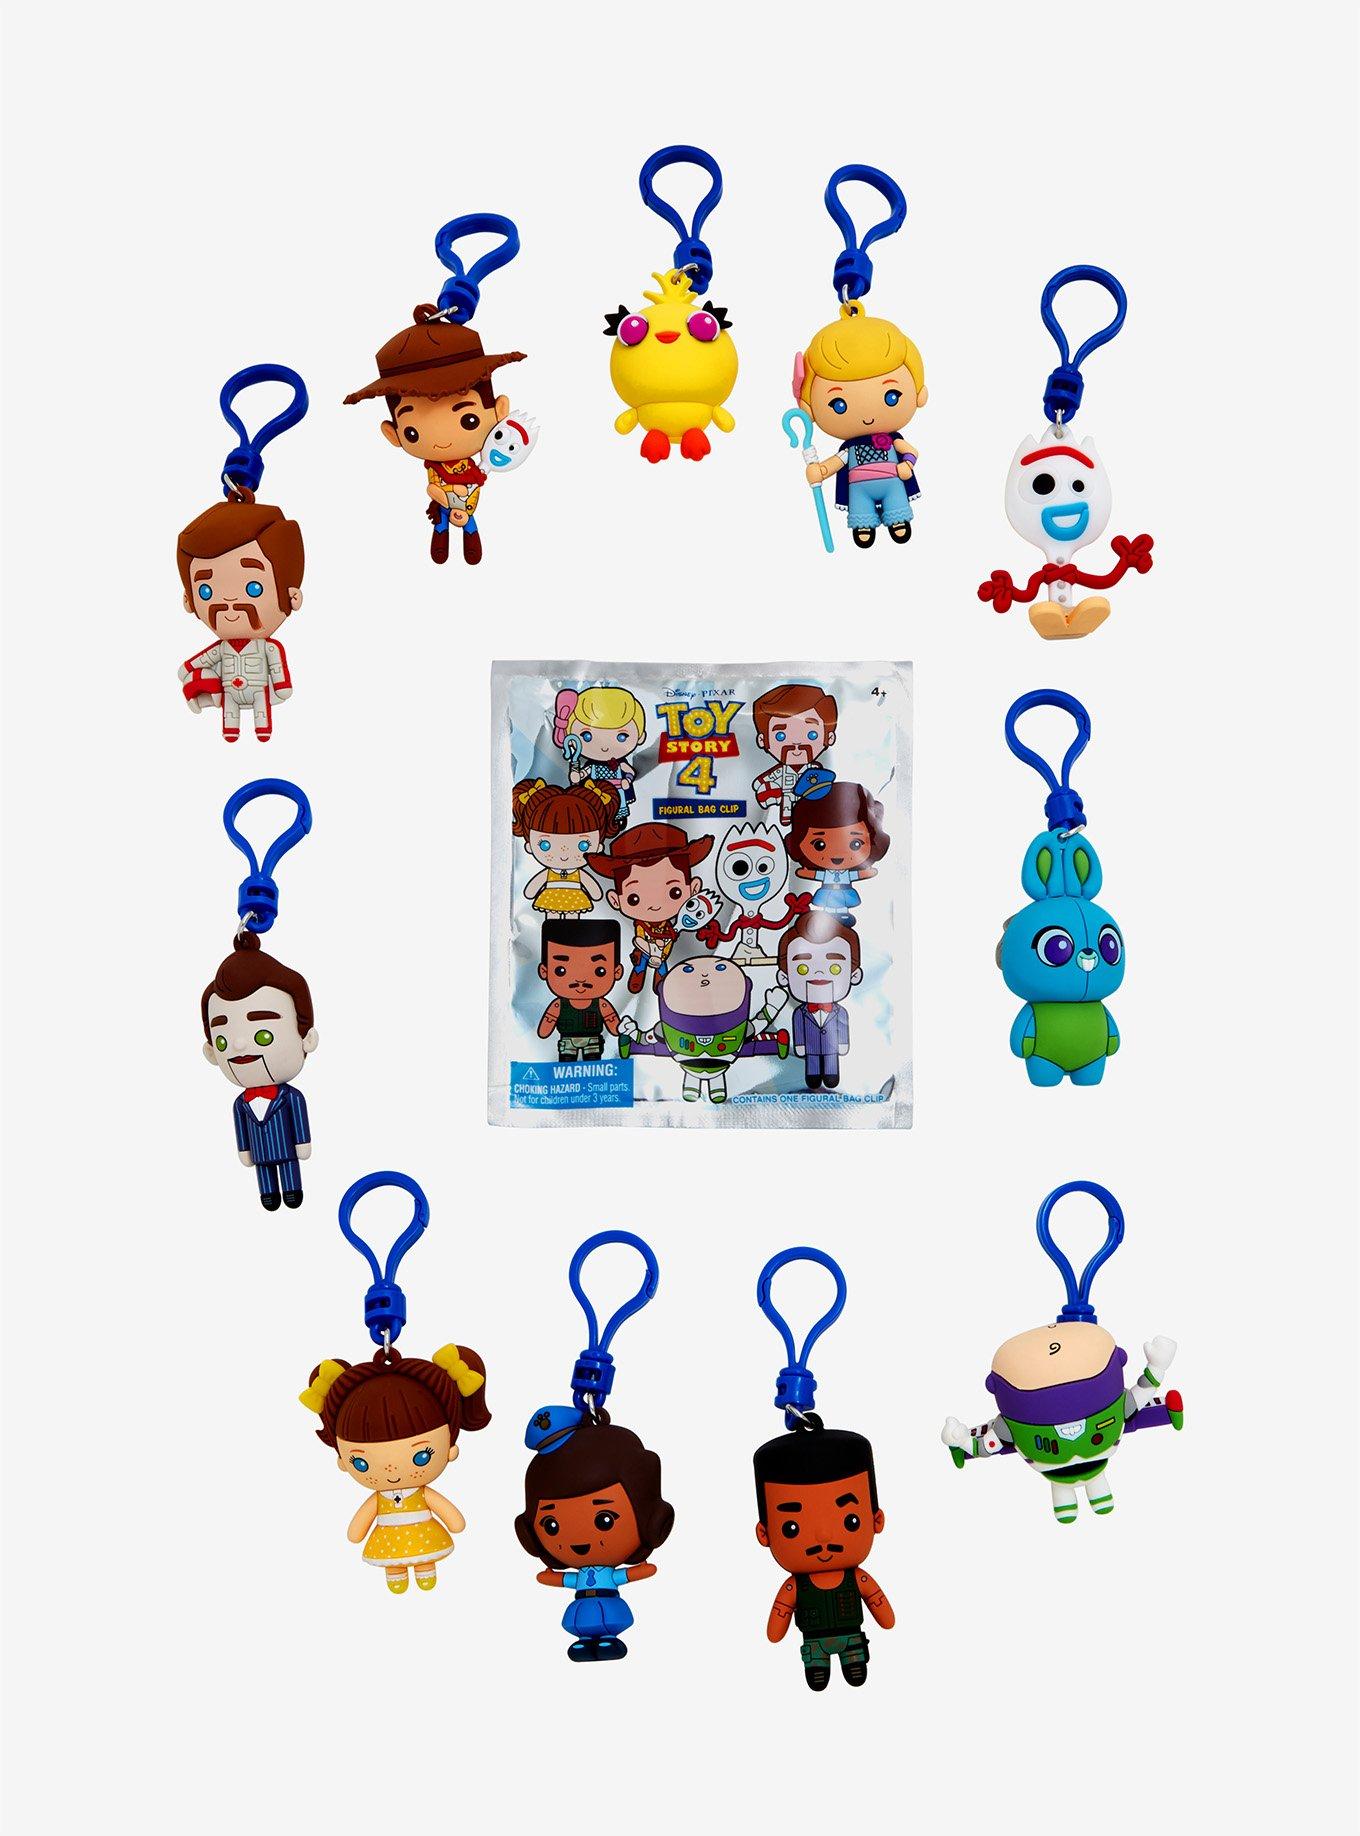 Duke Caboom Clip Details about   Toy Story 4 NEW Blind Bag 3D Figural Keychain Key Chain 